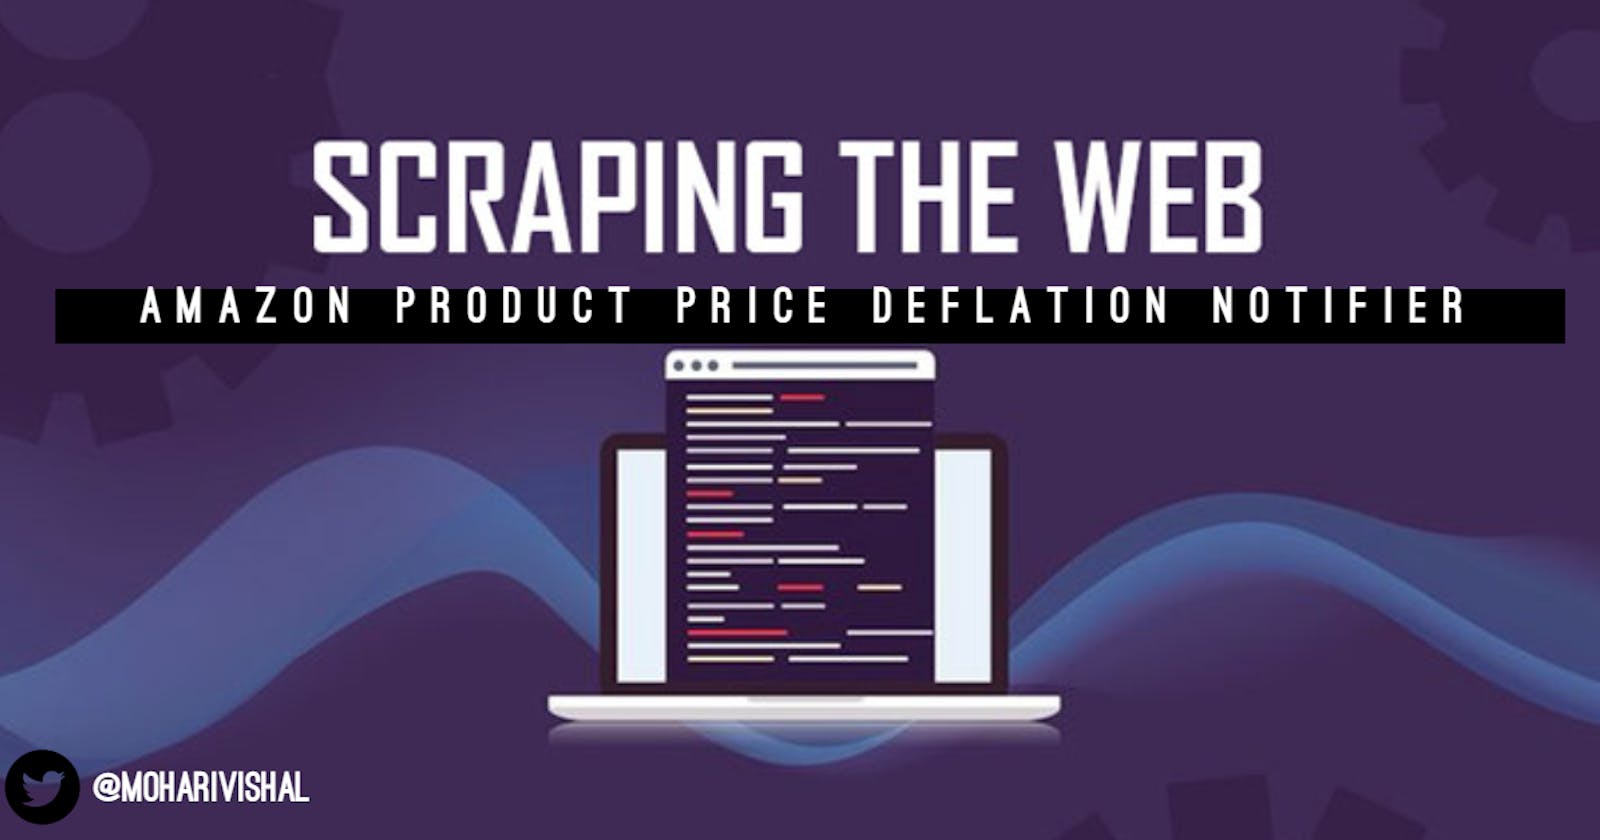 Building an Amazon Product Price Deflation tracker using Beautiful Soup 4 and Python